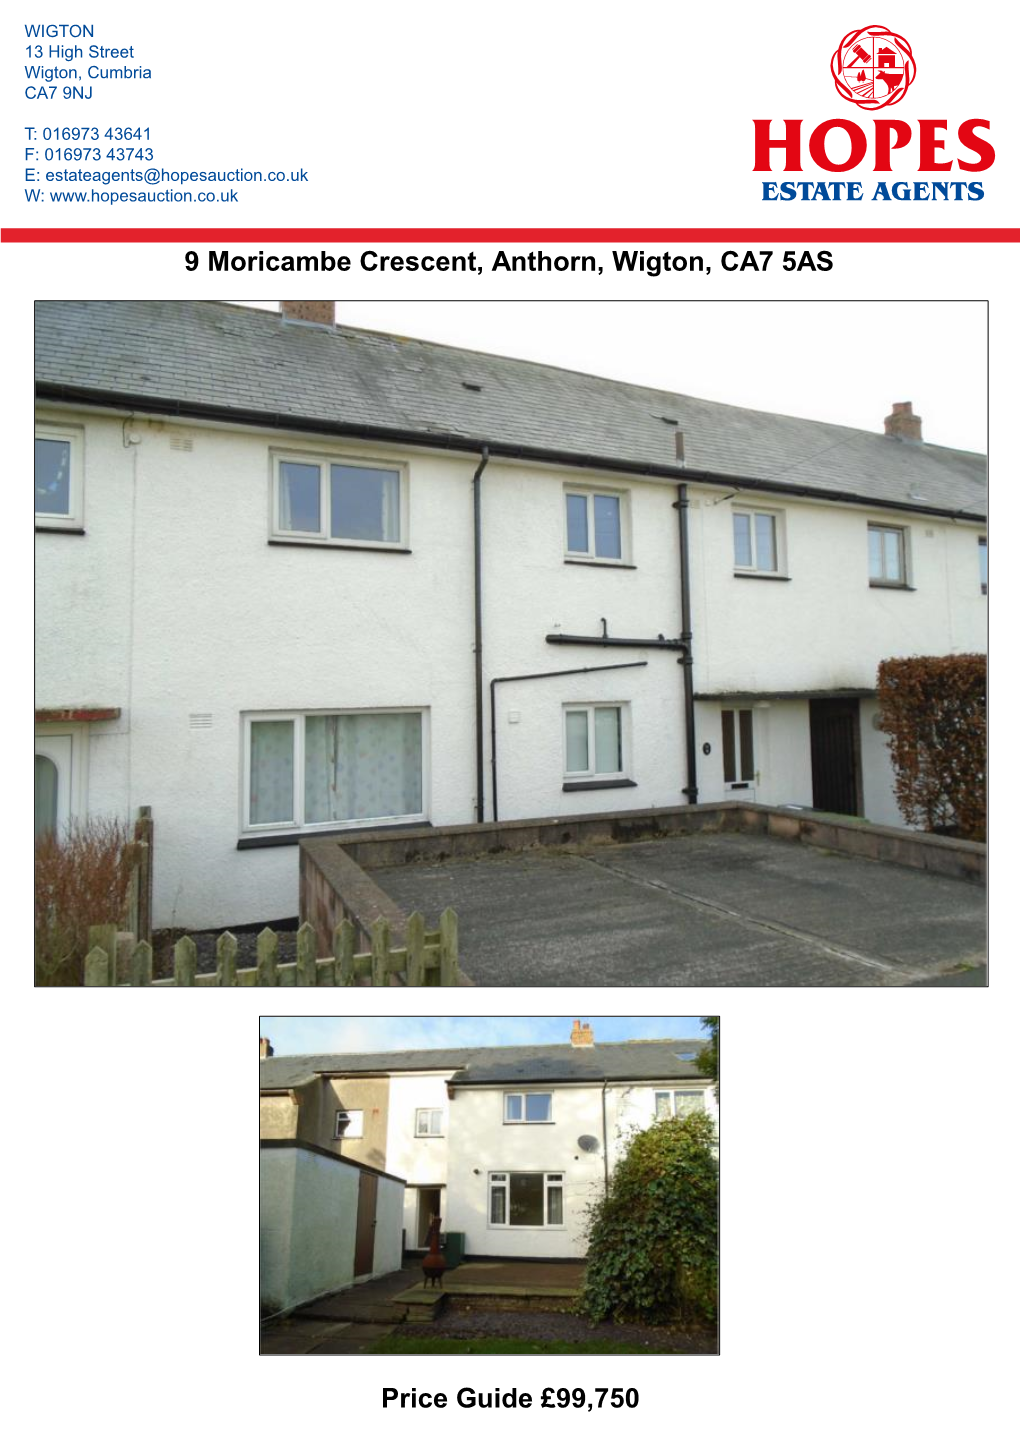 9 Moricambe Crescent, Anthorn, Wigton, CA7 5AS Price Guide